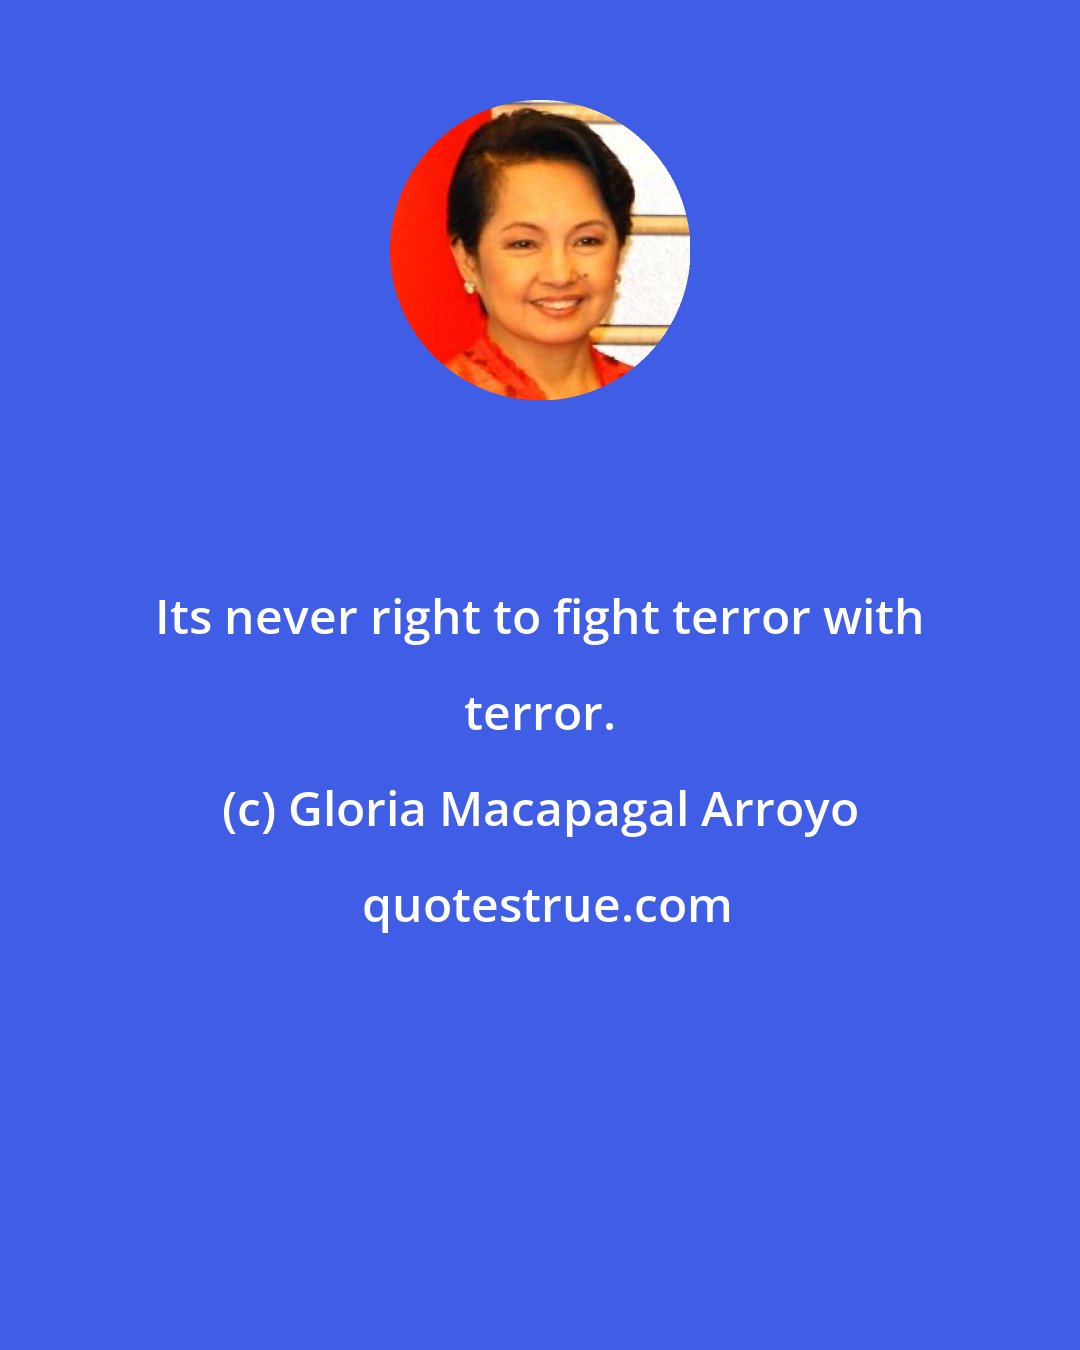 Gloria Macapagal Arroyo: Its never right to fight terror with terror.